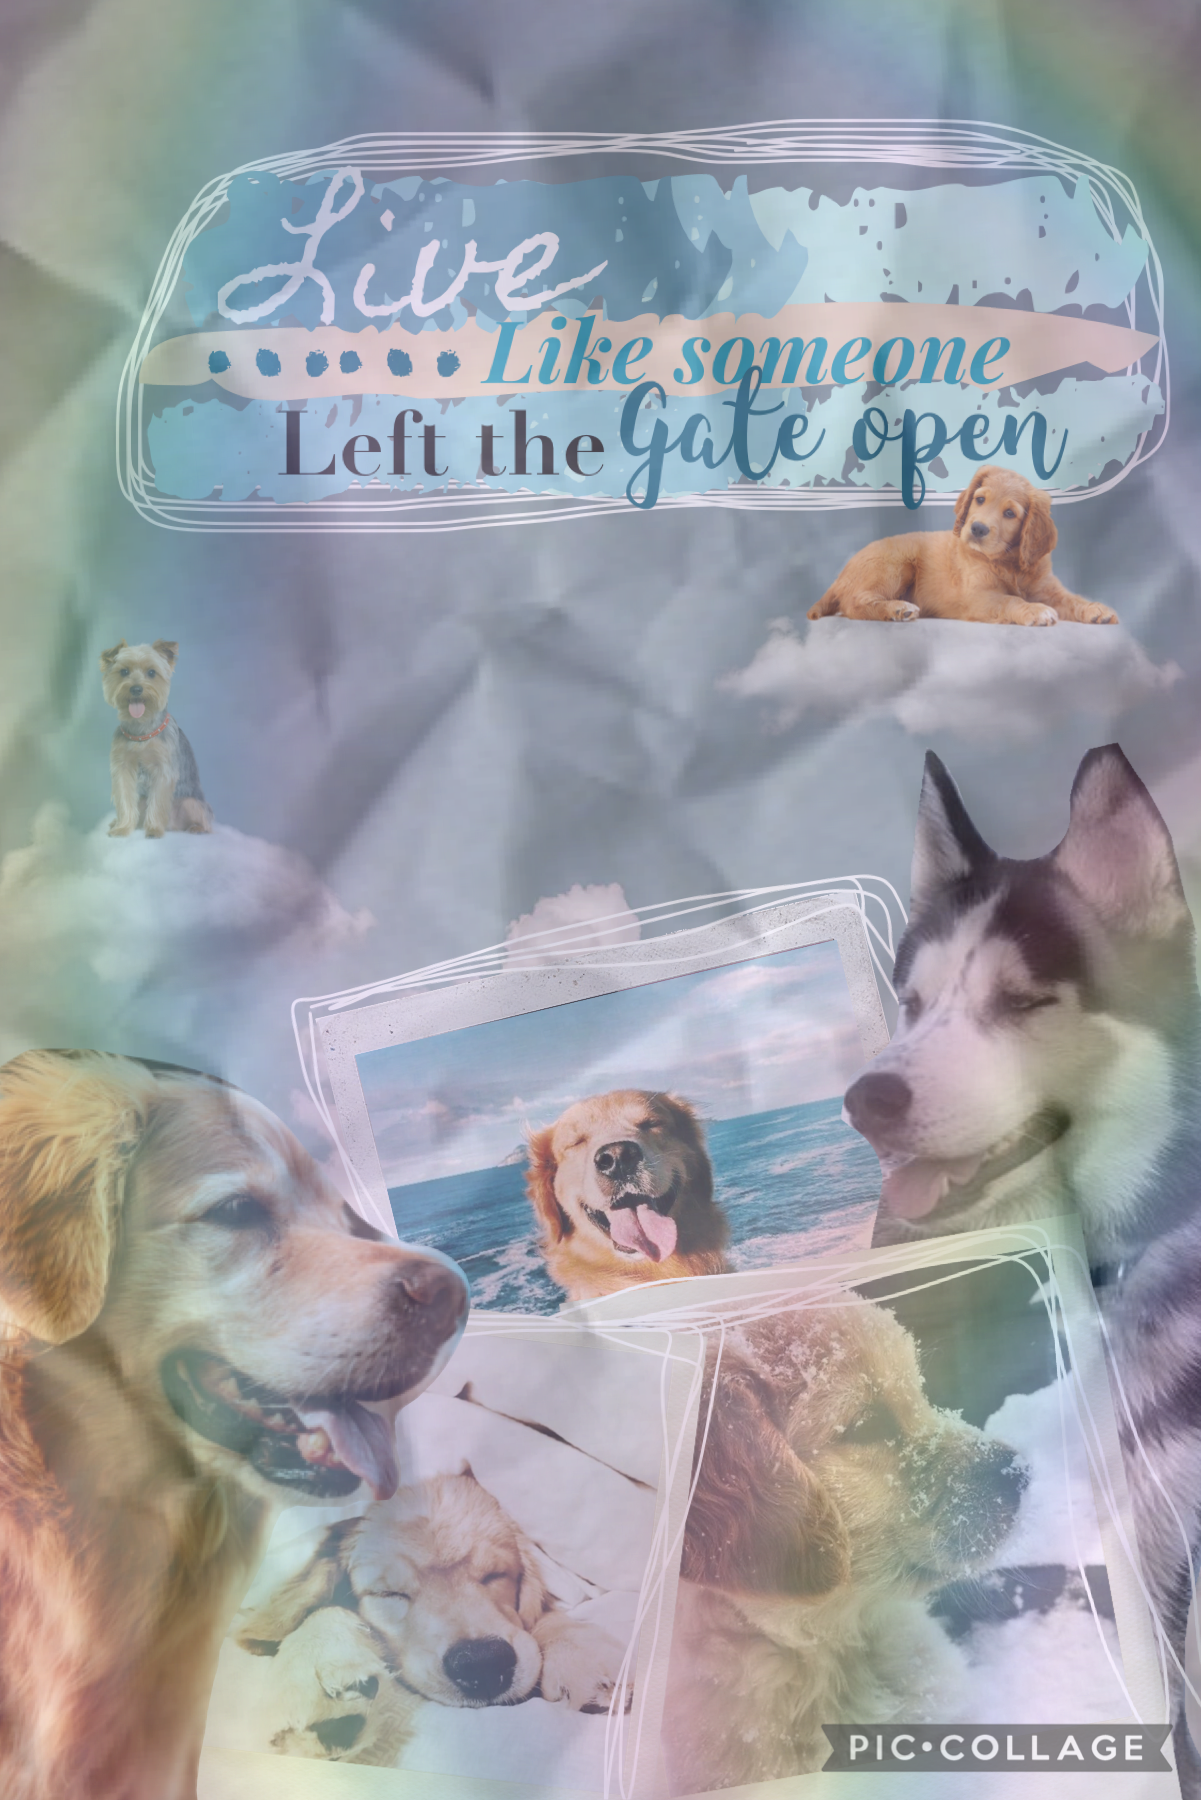 ✨dogs✨
This isn’t really a draft this was actually for someone’s dog contest but for some reason I never posted it. I kinda like it tho, it’s kind of weird bc I had these collage phases like this is from my happy phase, u can tell by the vibe ig 
